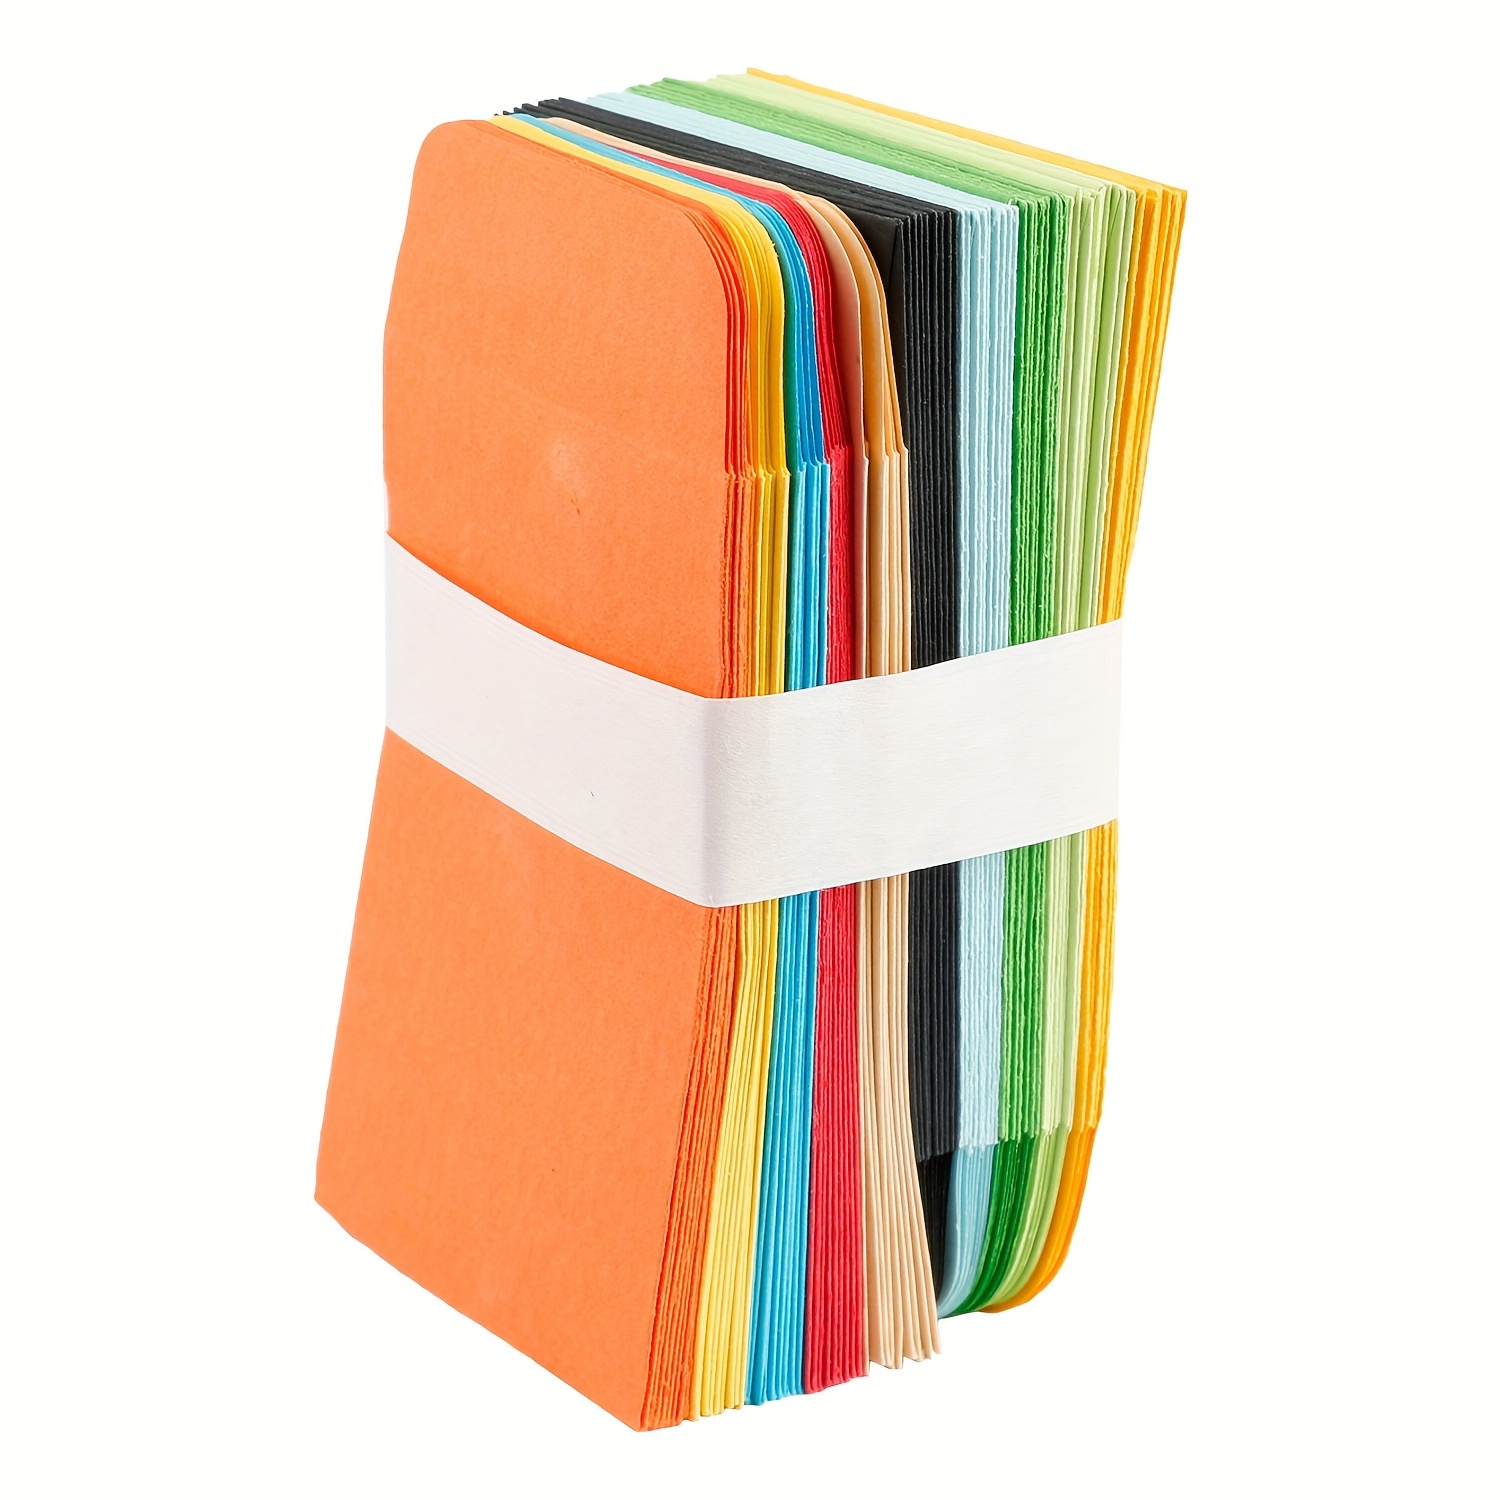 

100pcs Colorful Mini Envelopes, Self-adhesive Small Envelopes, Multi-colored Coin Envelopes, Parts Envelopes To Wrap Or Store Small Items